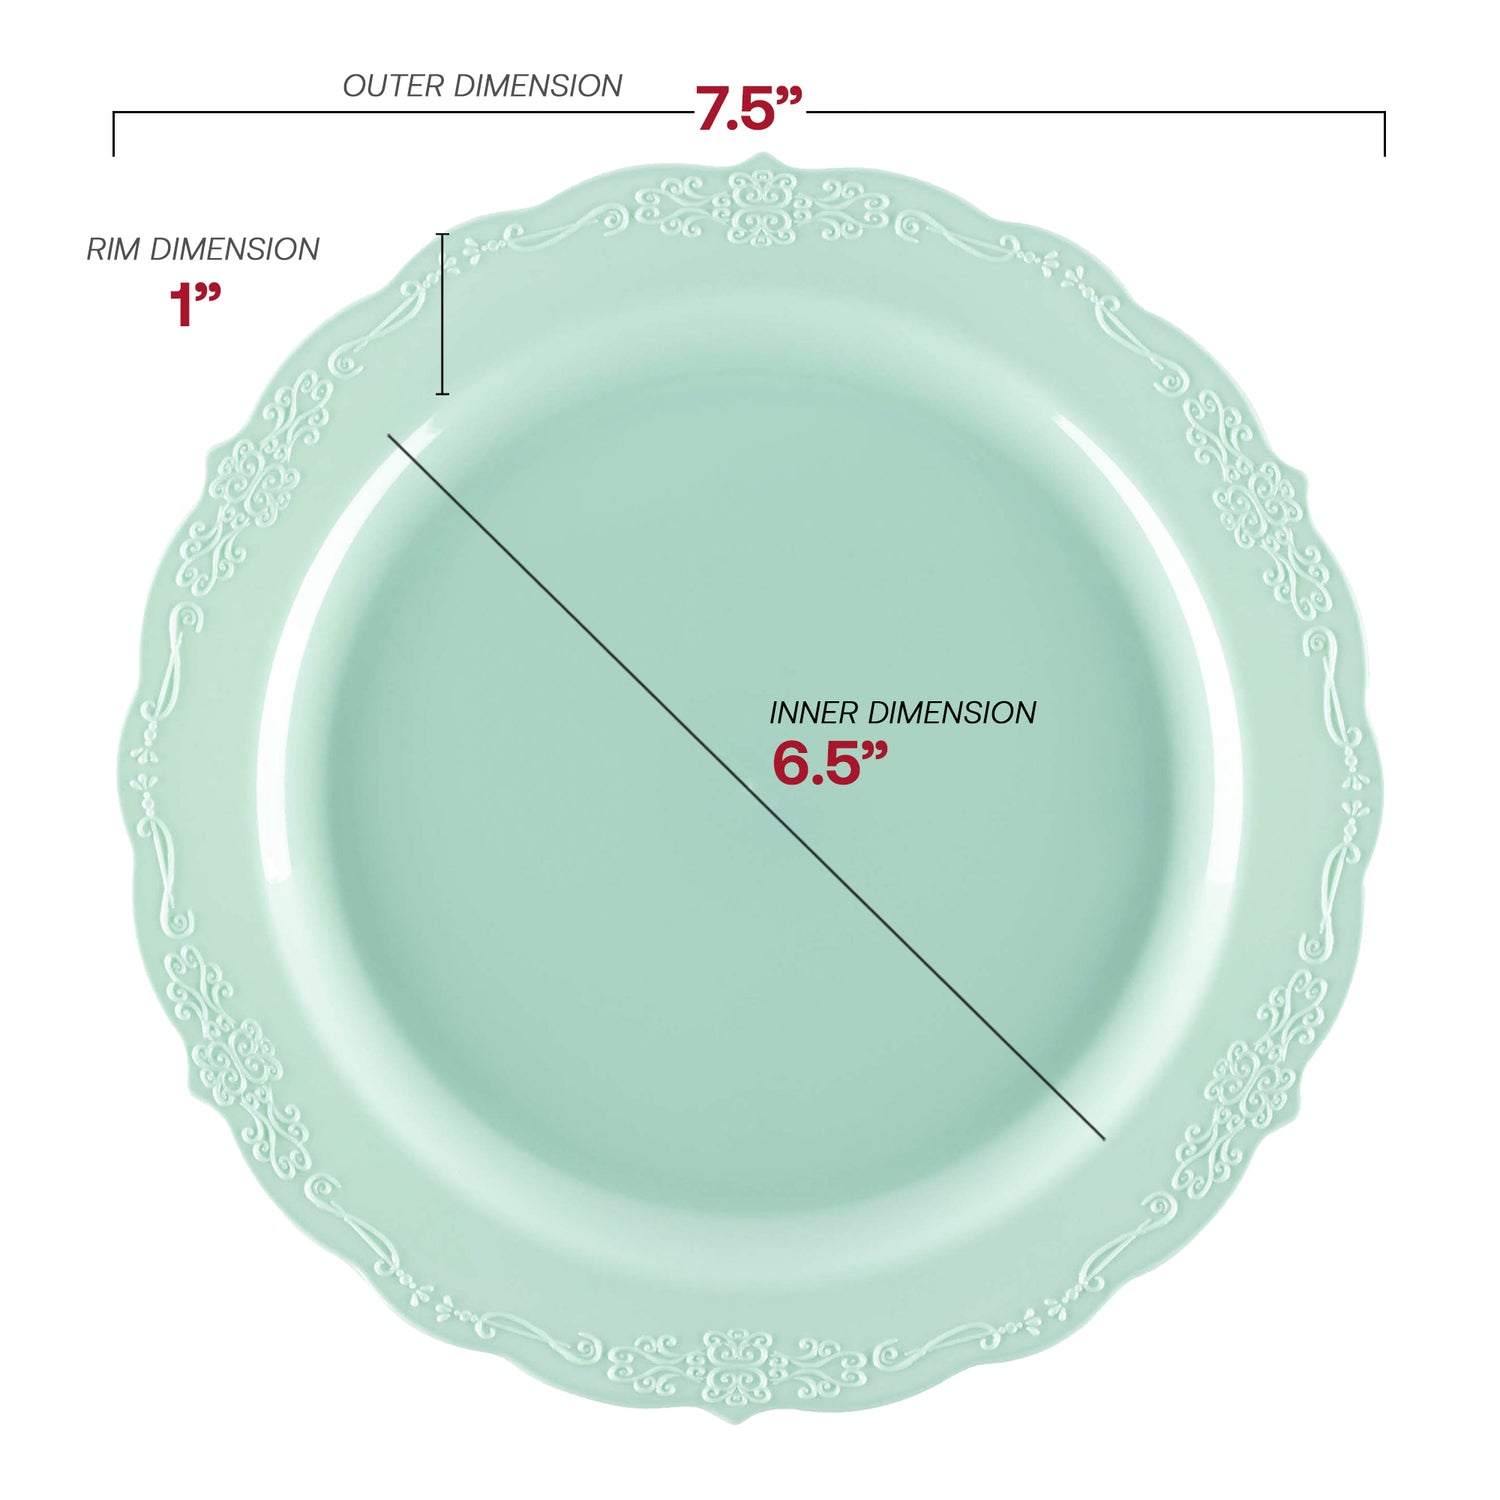 Turquoise Vintage Round Disposable Plastic Appetizer/Salad Plates (7.5") Dimension | The Kaya Collection